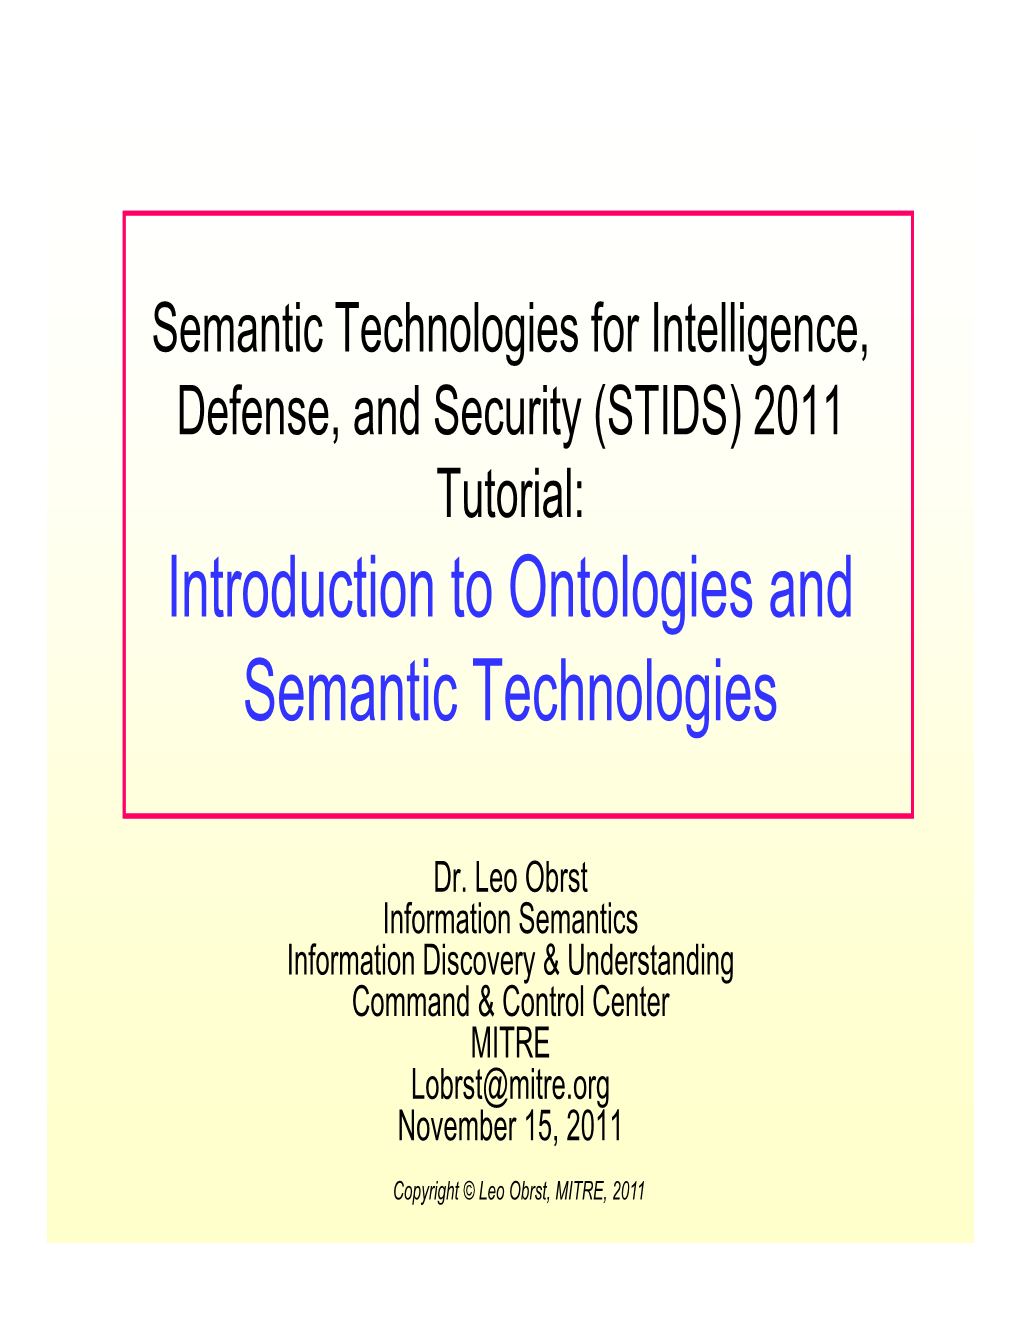 Introduction to Ontologies and Semantic Technologies